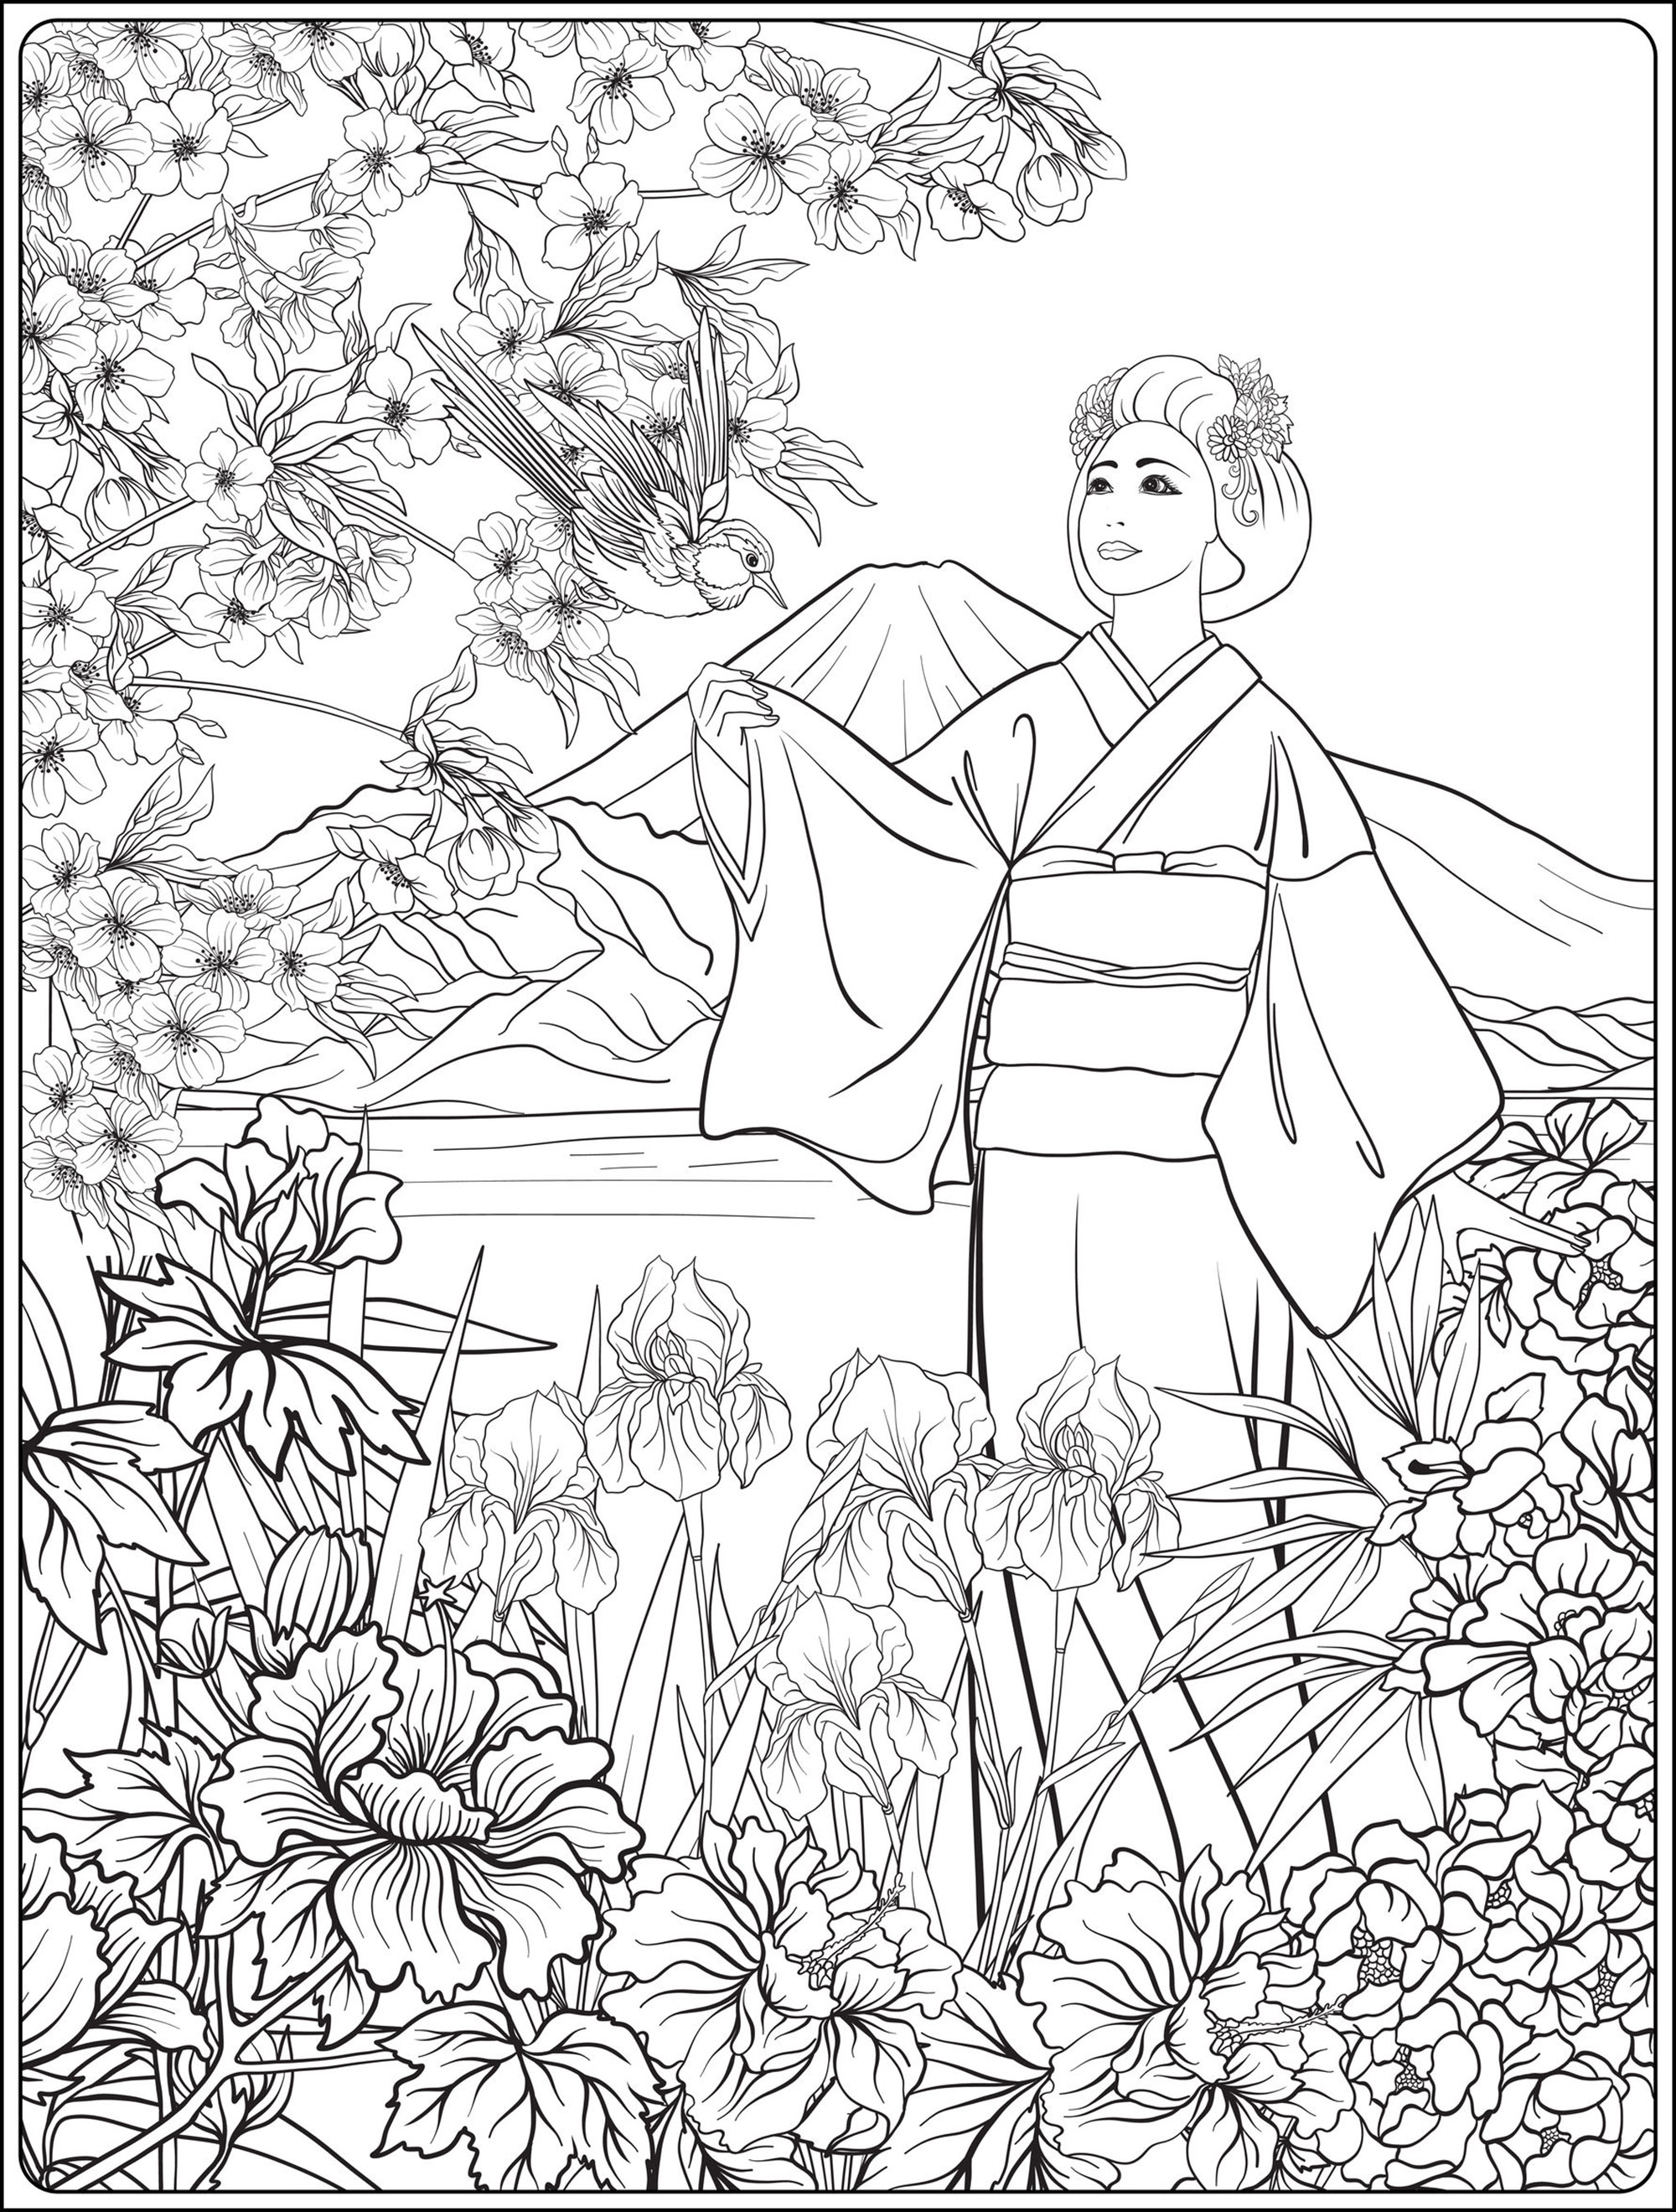 Japanese landscape with Mount Fuji and sea, with Japanese woman in kimino, traditional flowers and a pretty bird. This coloring page 'Japanese woman in kimono and Mount Fuji' is a real ode to Japanese culture. It shows a Japanese woman dressed in a kimono, standing on a Japanese landscape with Mount Fuji and the sea. She is surrounded by traditional flowers and a pretty bird, Artist : Elena Besedina   Source : 123rf